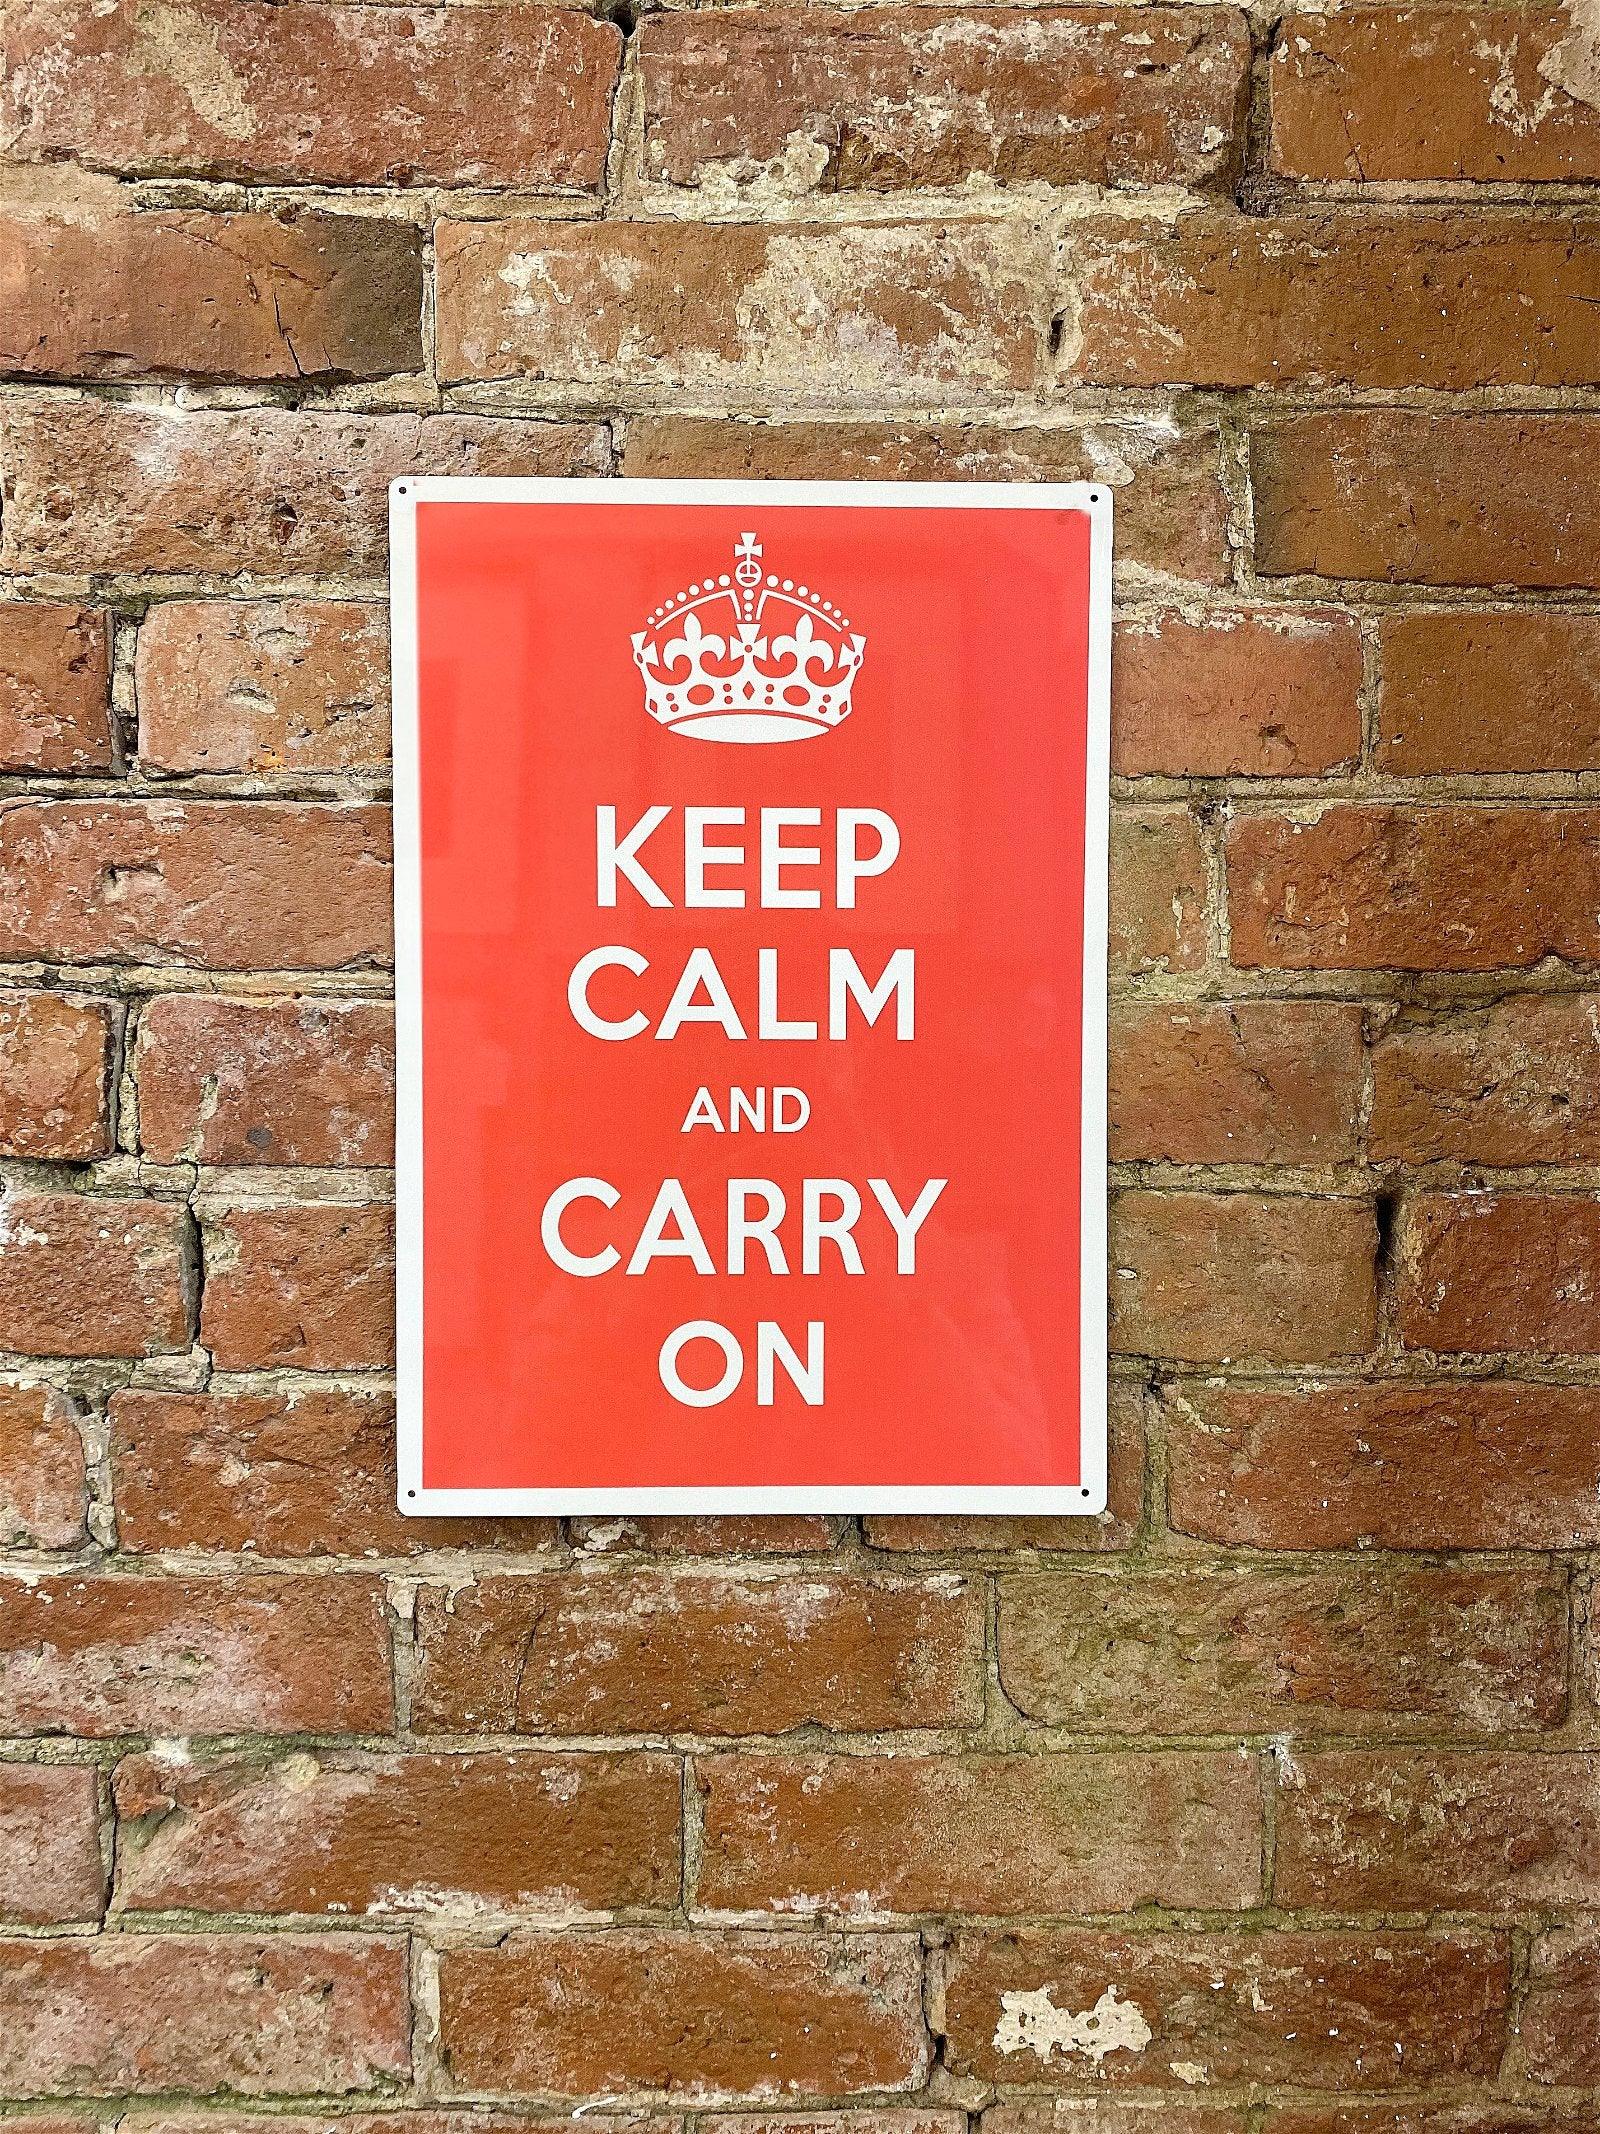 View Metal Humour Wall Sign Keep Calm And Carry On information